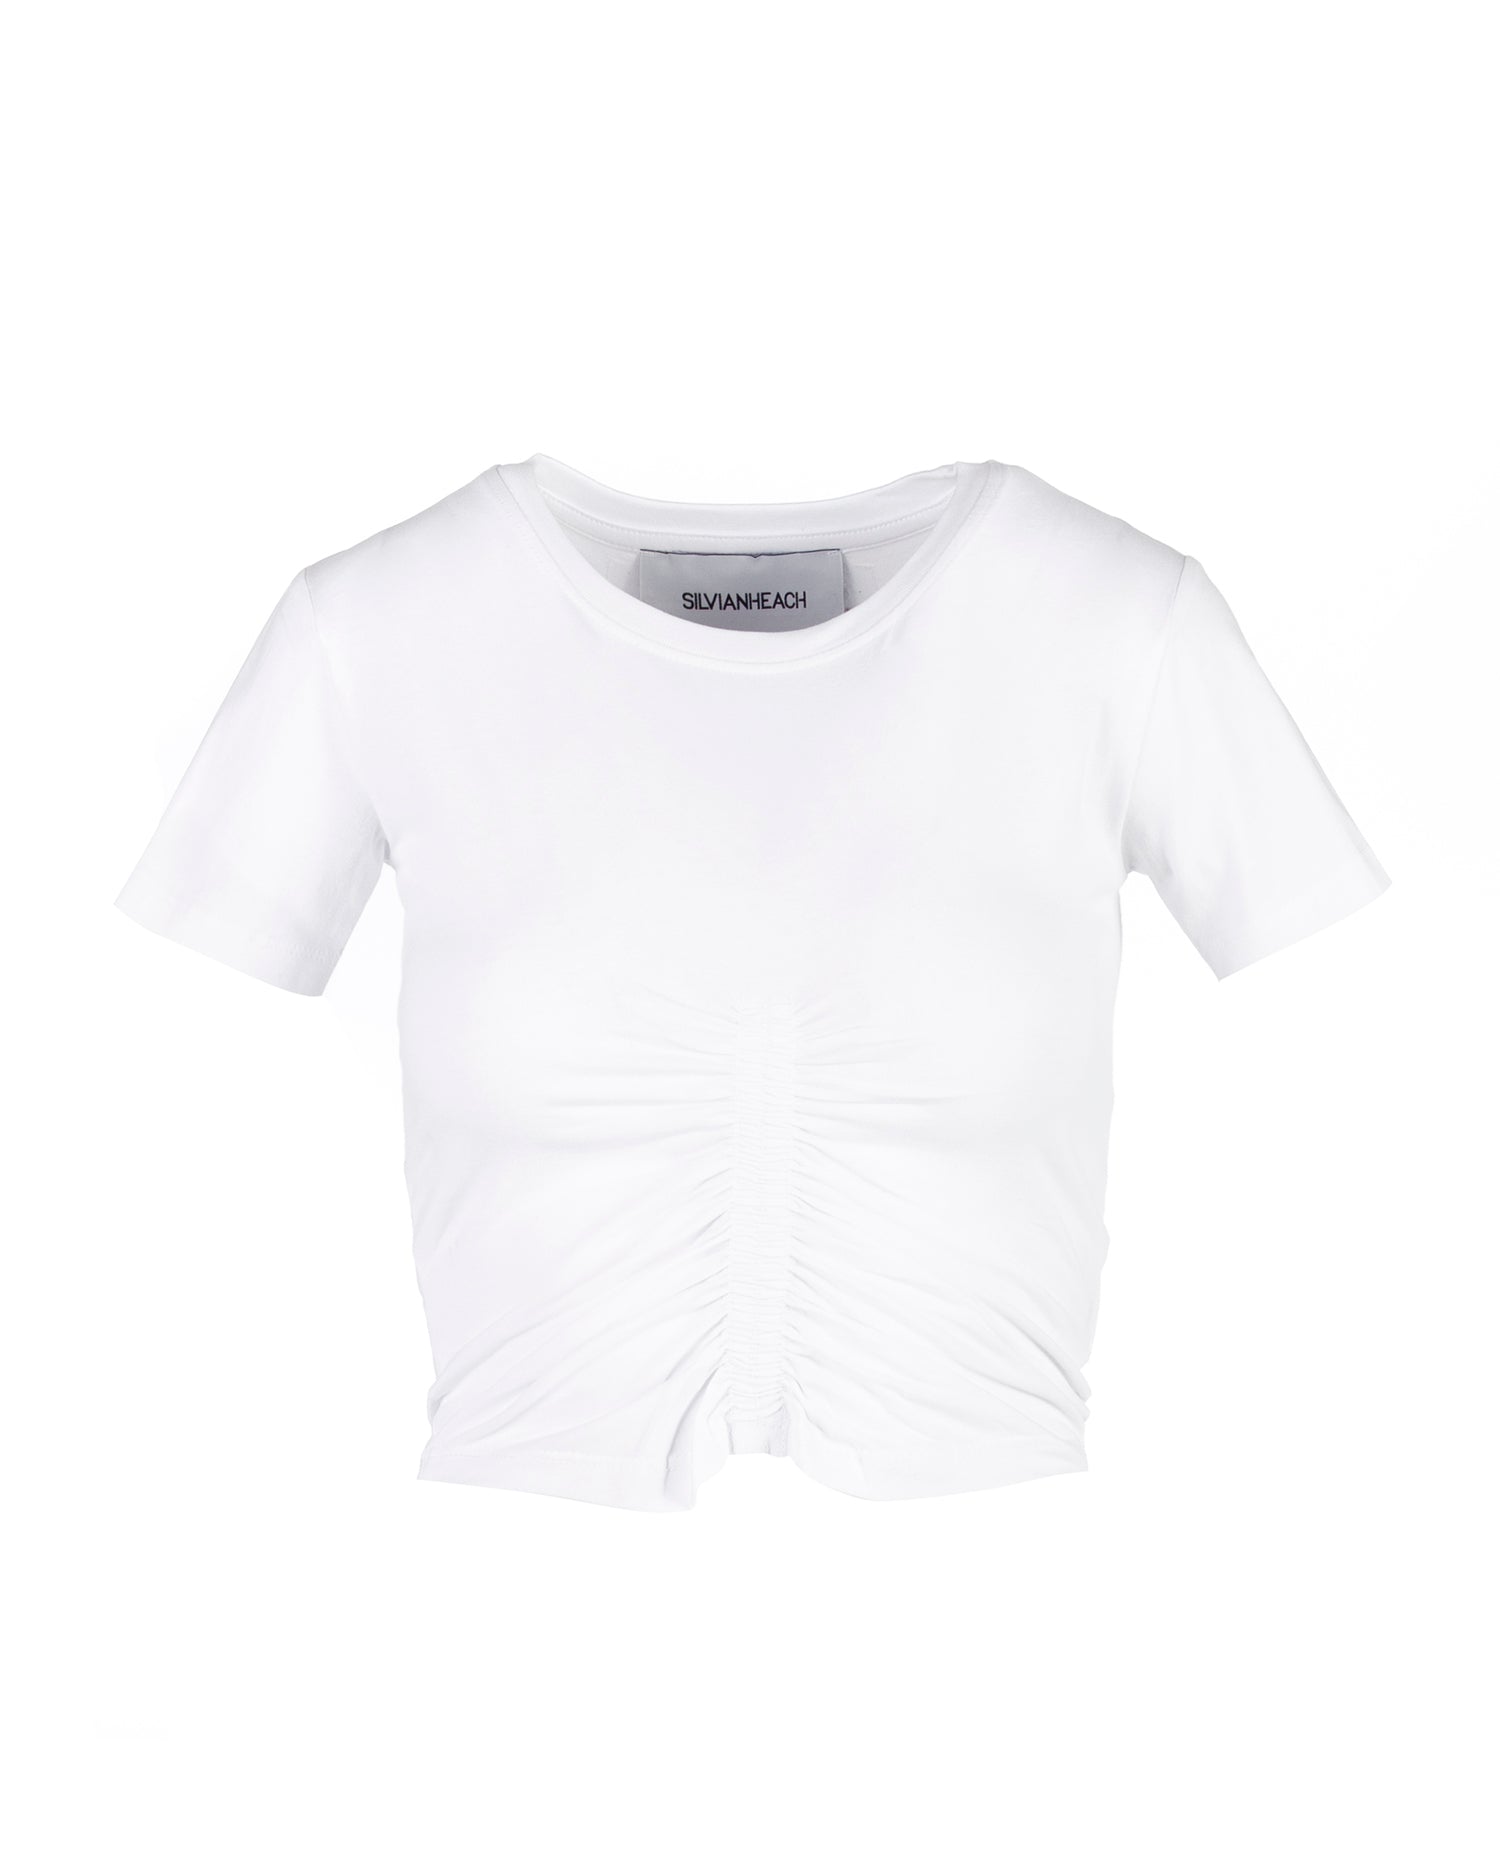 CROPPED T-SHIRT WITH RUCHING ON THE FRONT